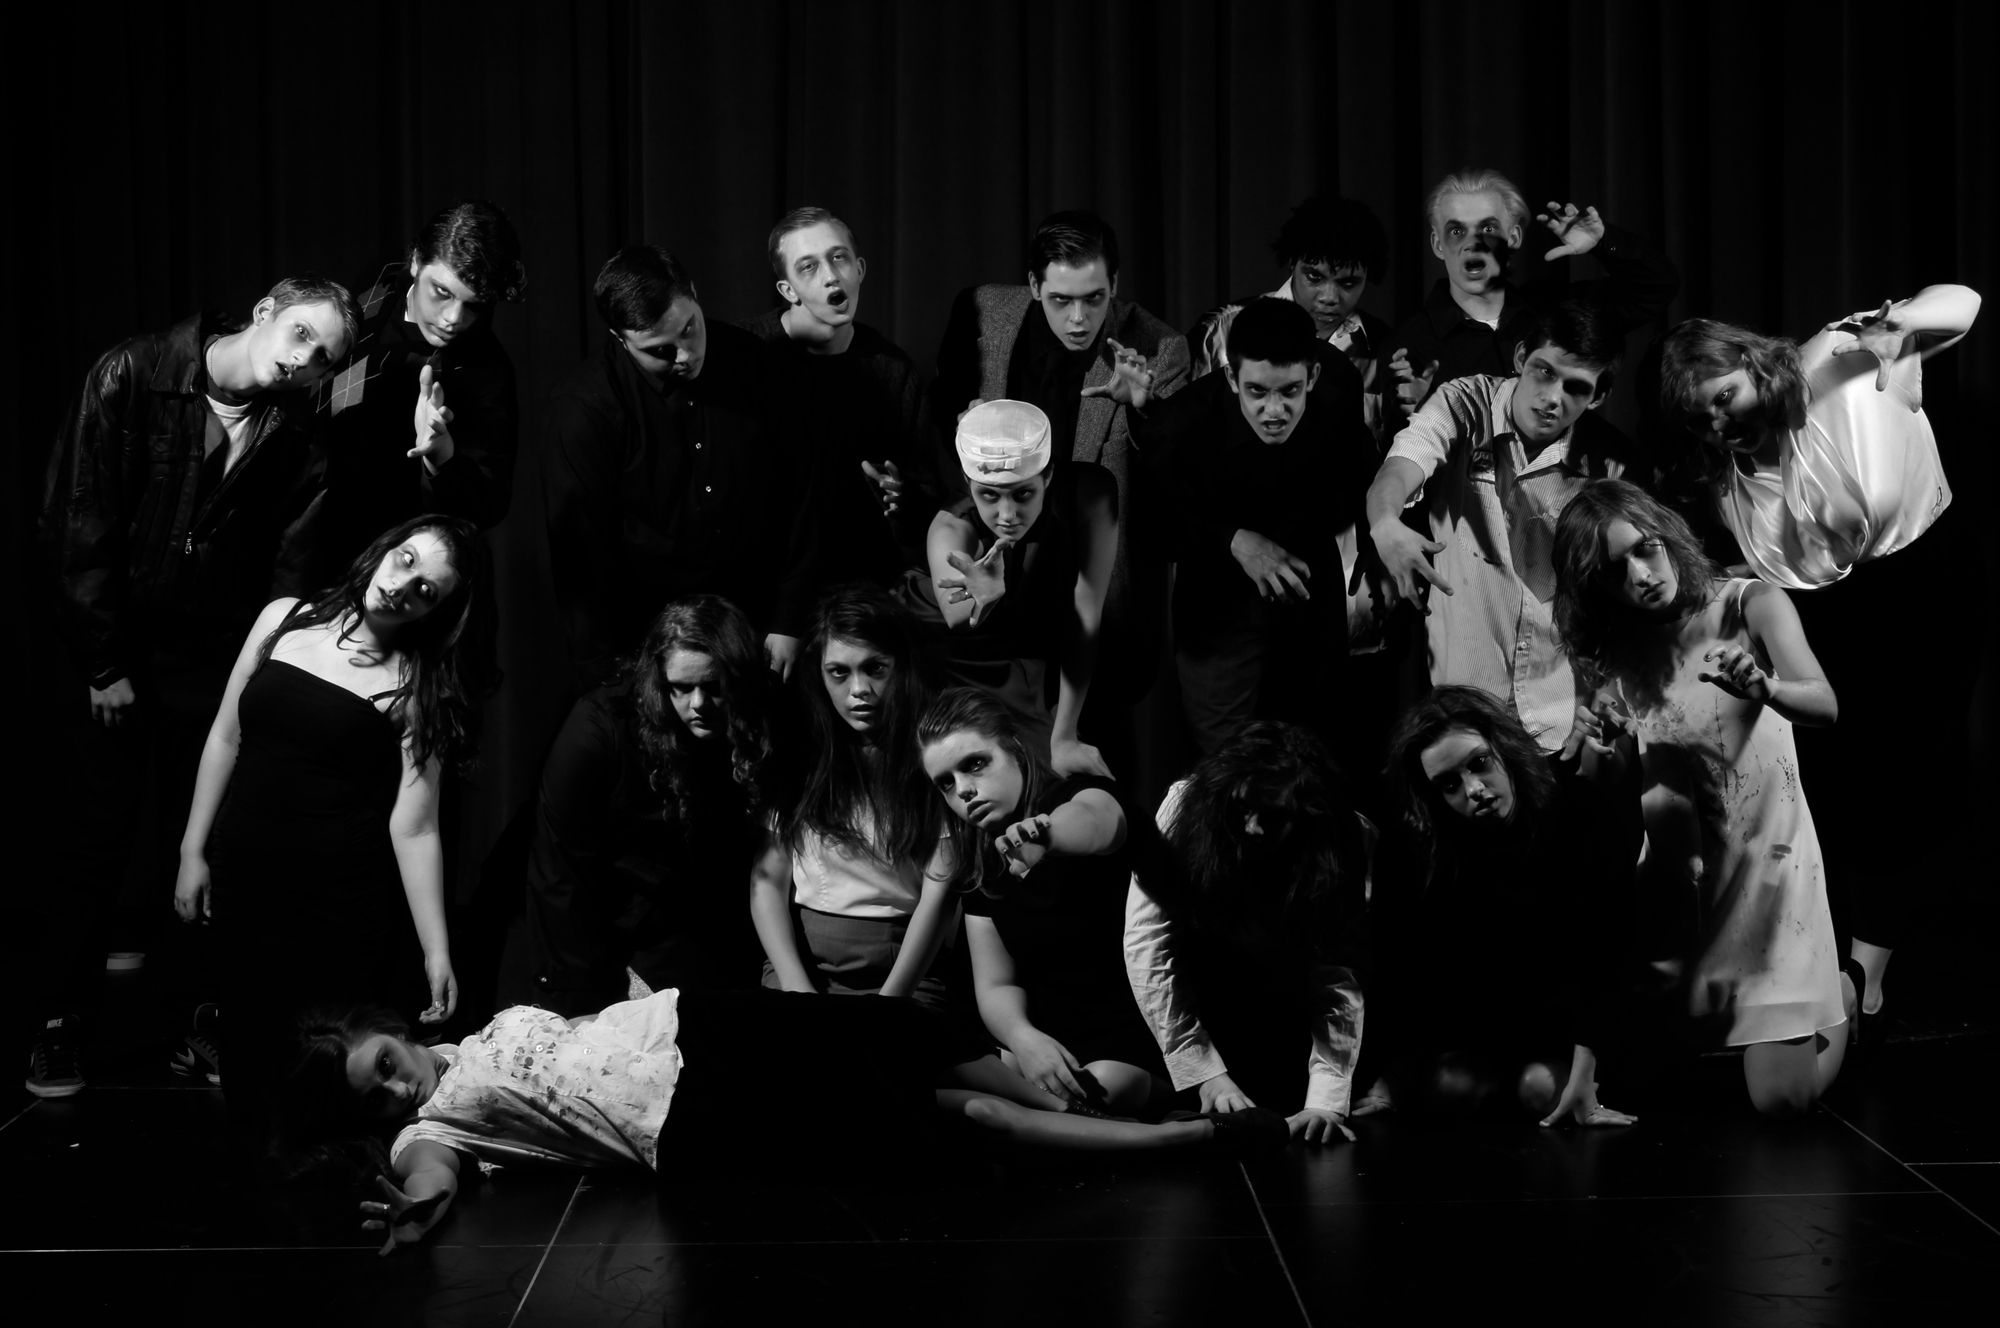 The Evergreen High School Theatre Department presents &quot;Night of the Living Dead,&quot; based on the film by George Romero, at Evergreen High School's auditorium.